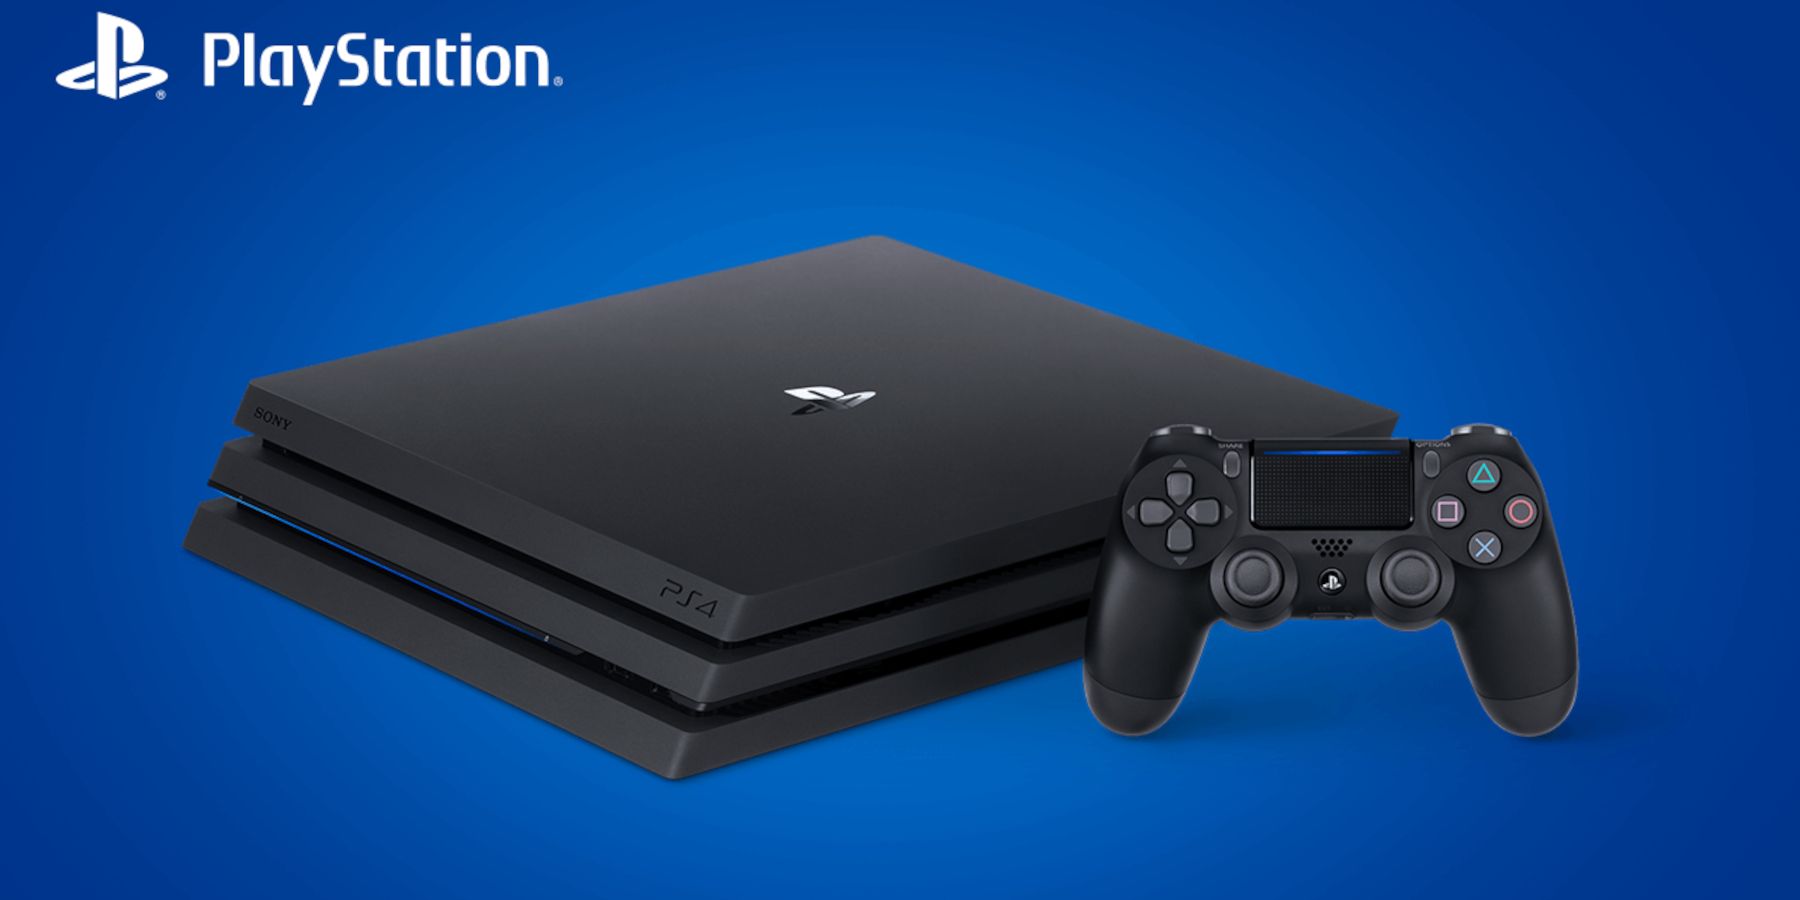 Folde skruenøgle Uventet PS4 Update 10.50 is Available to Download Right Now